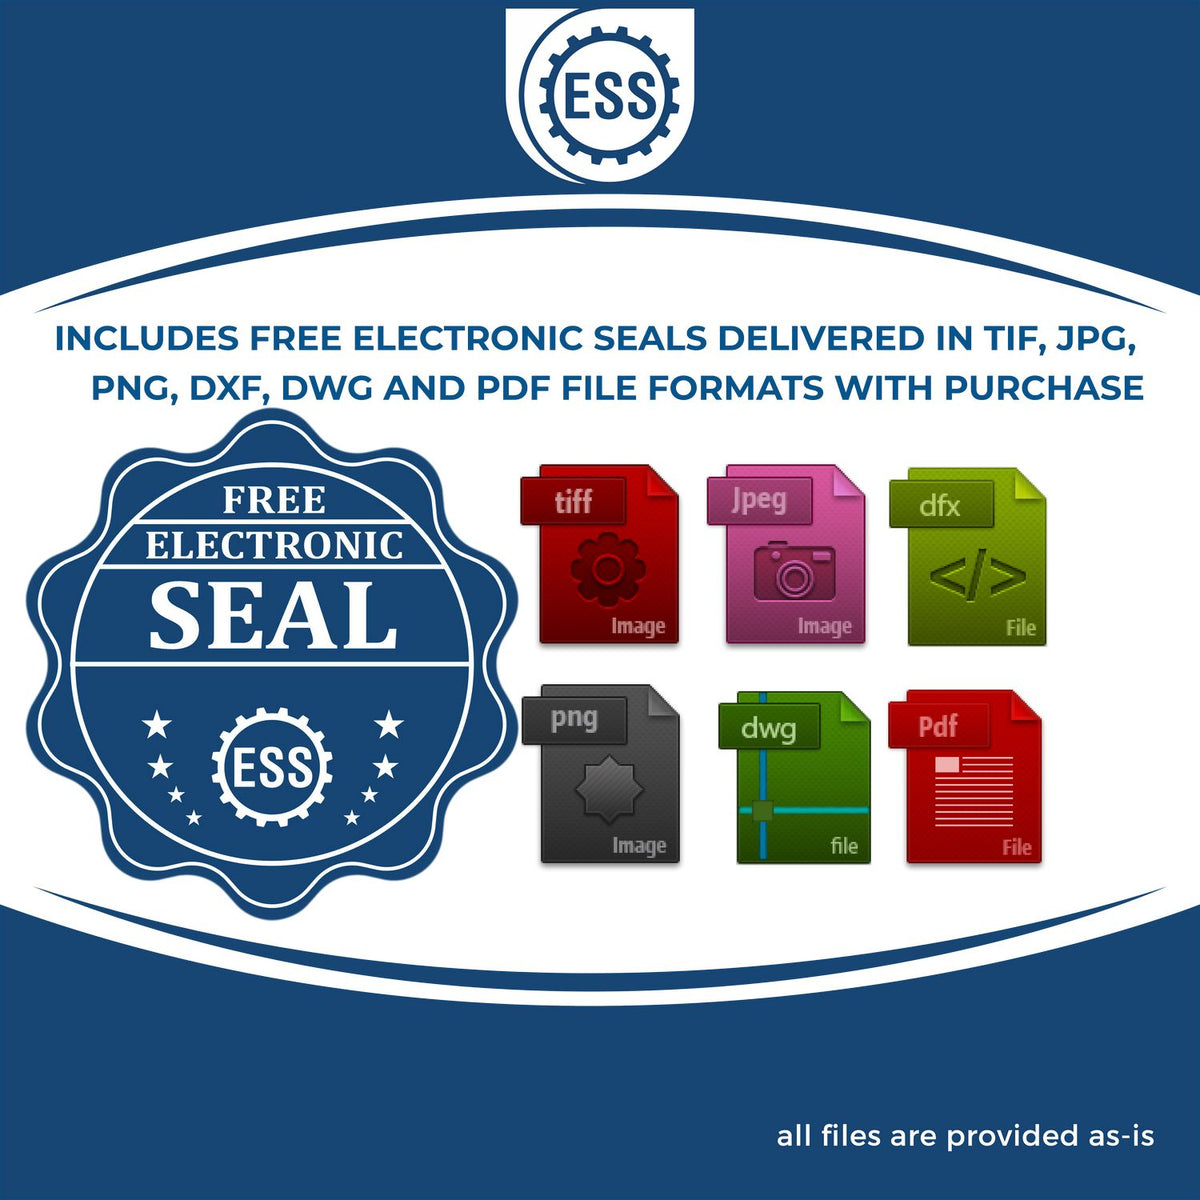 An infographic for the free electronic seal for the Slim Pre-Inked North Dakota Landscape Architect Seal Stamp illustrating the different file type icons such as DXF, DWG, TIF, JPG and PNG.